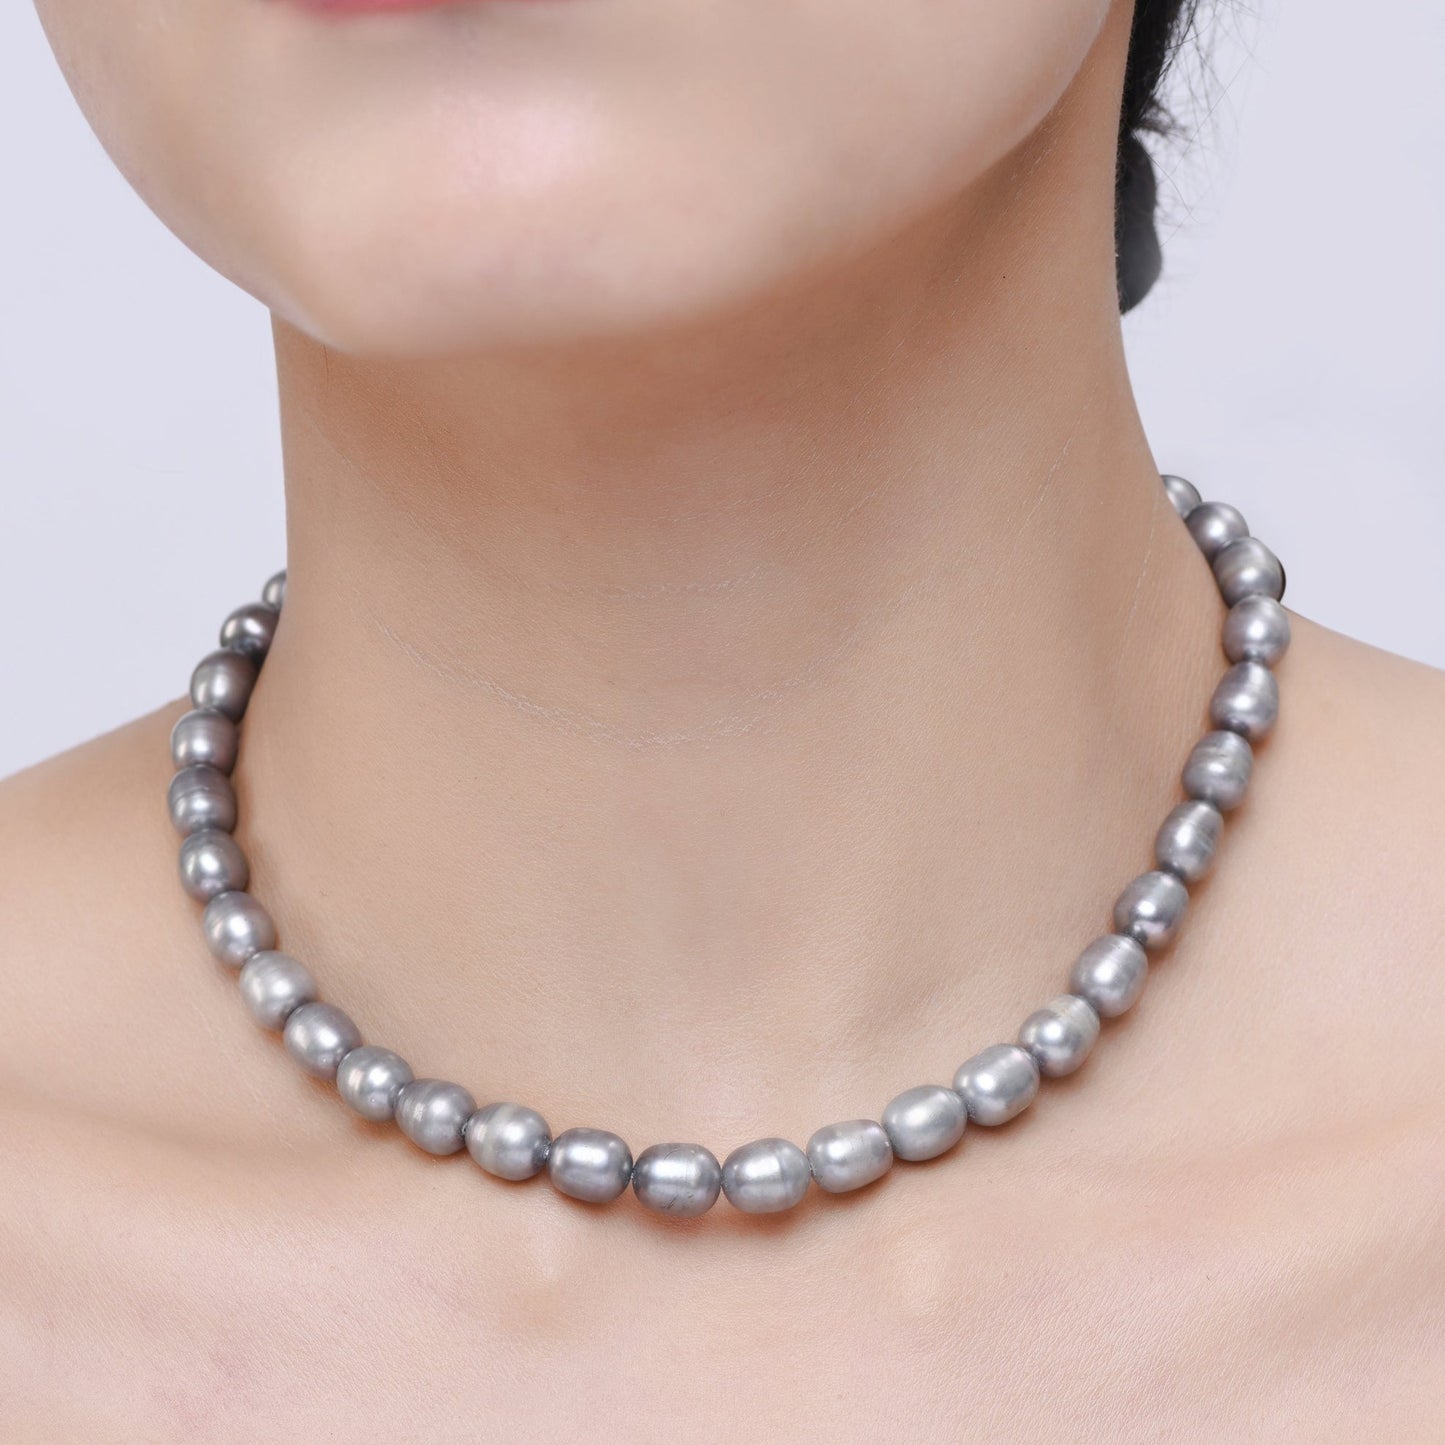 Timeless Natural Grey Pearl Necklace| 925 Silver - From Purl Purl